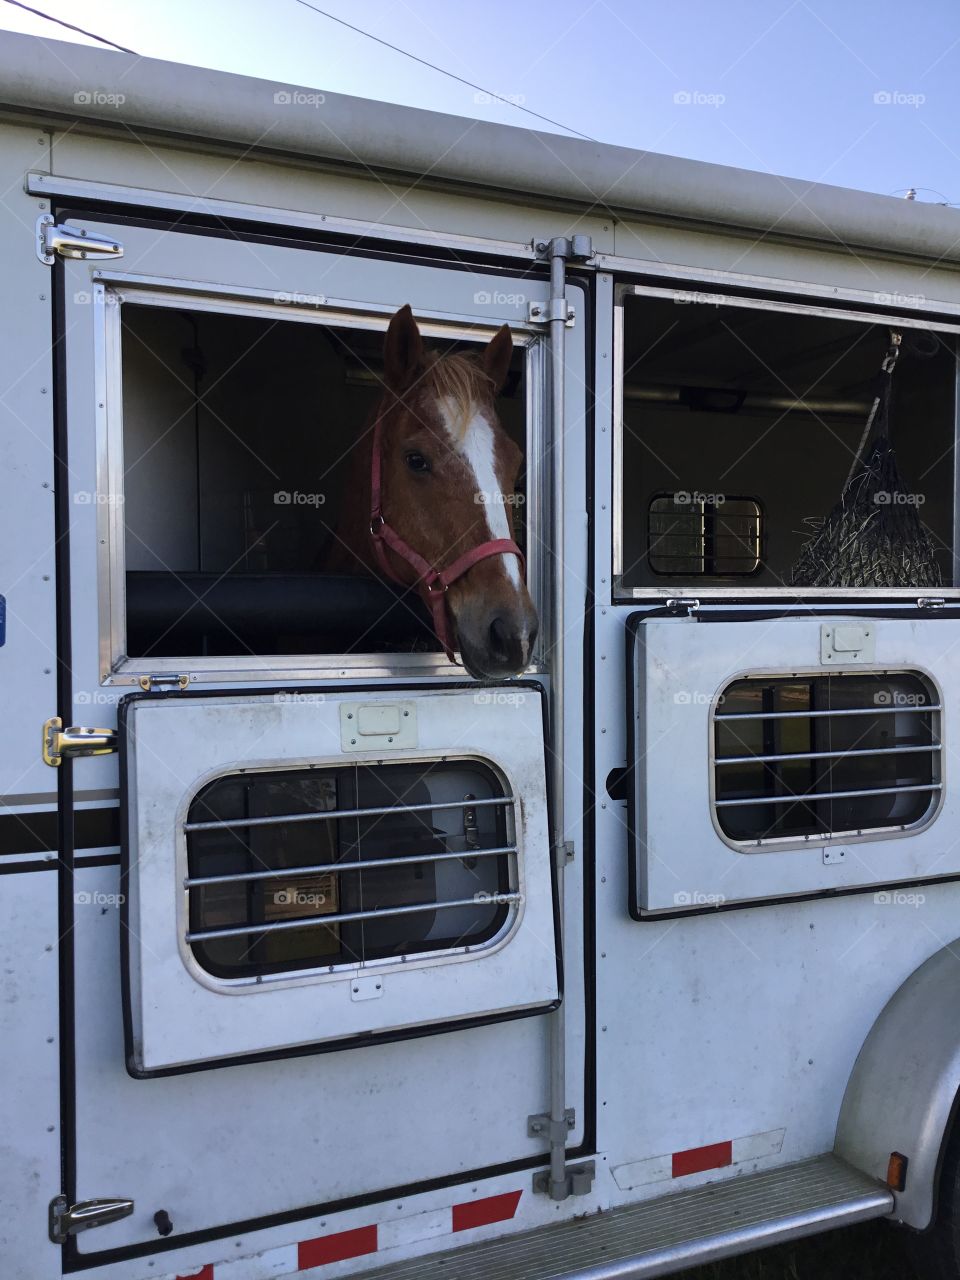 Levi loaded and ready to go to the saddle club and practice a little barrel racing!